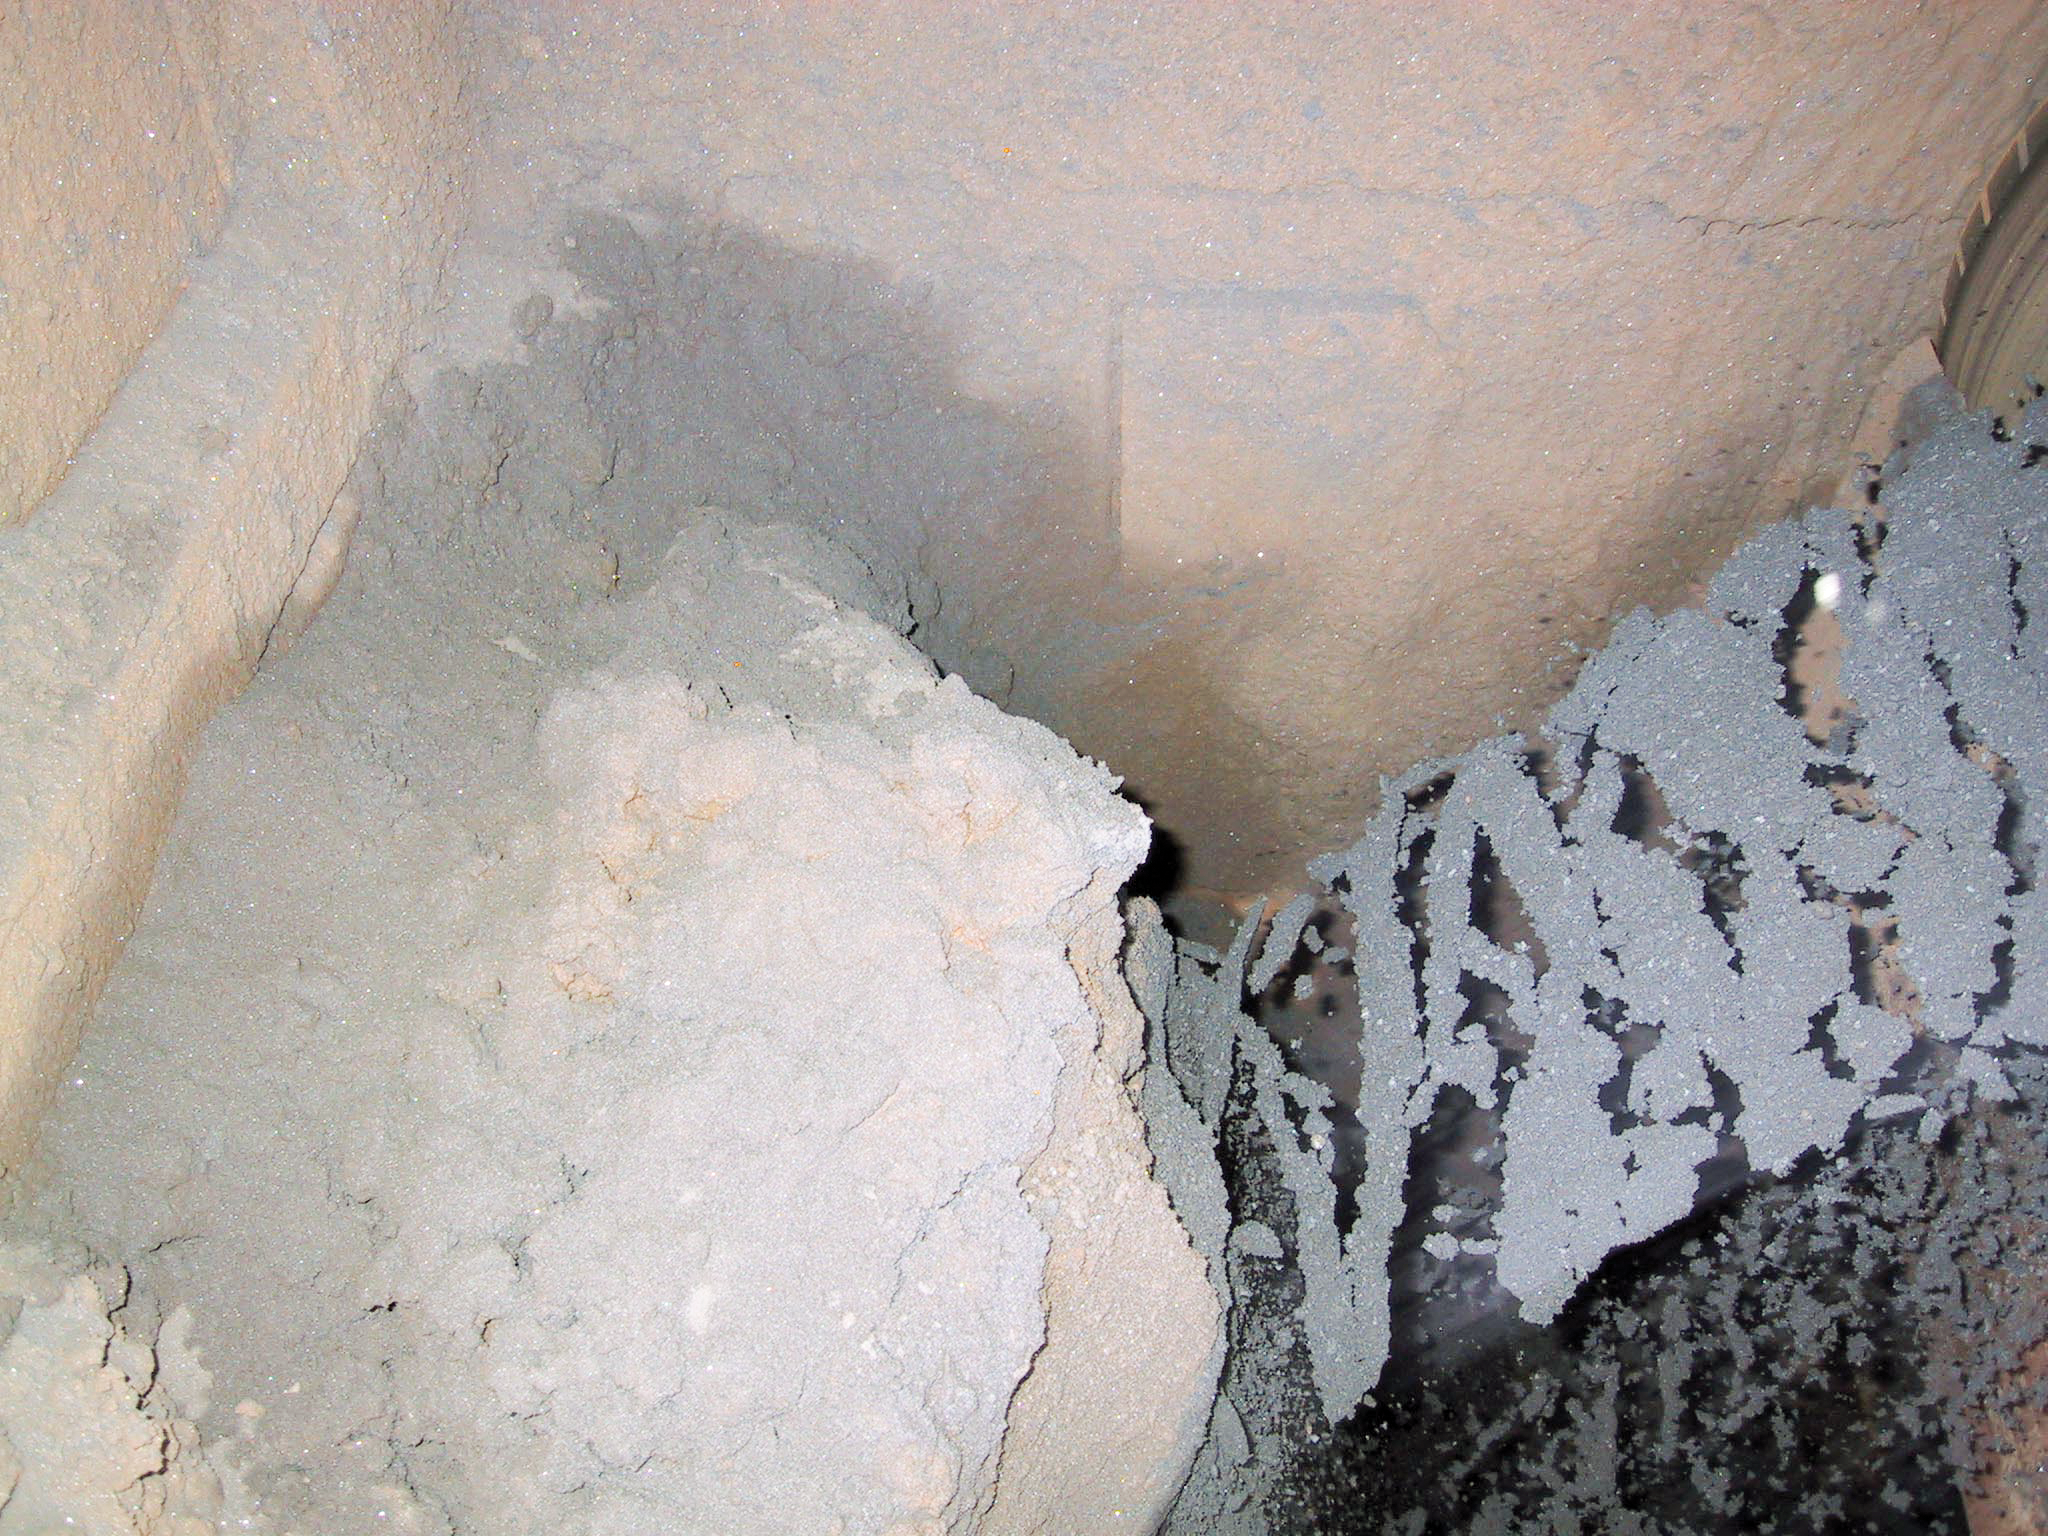 Material accumulated inside transfer chutes.